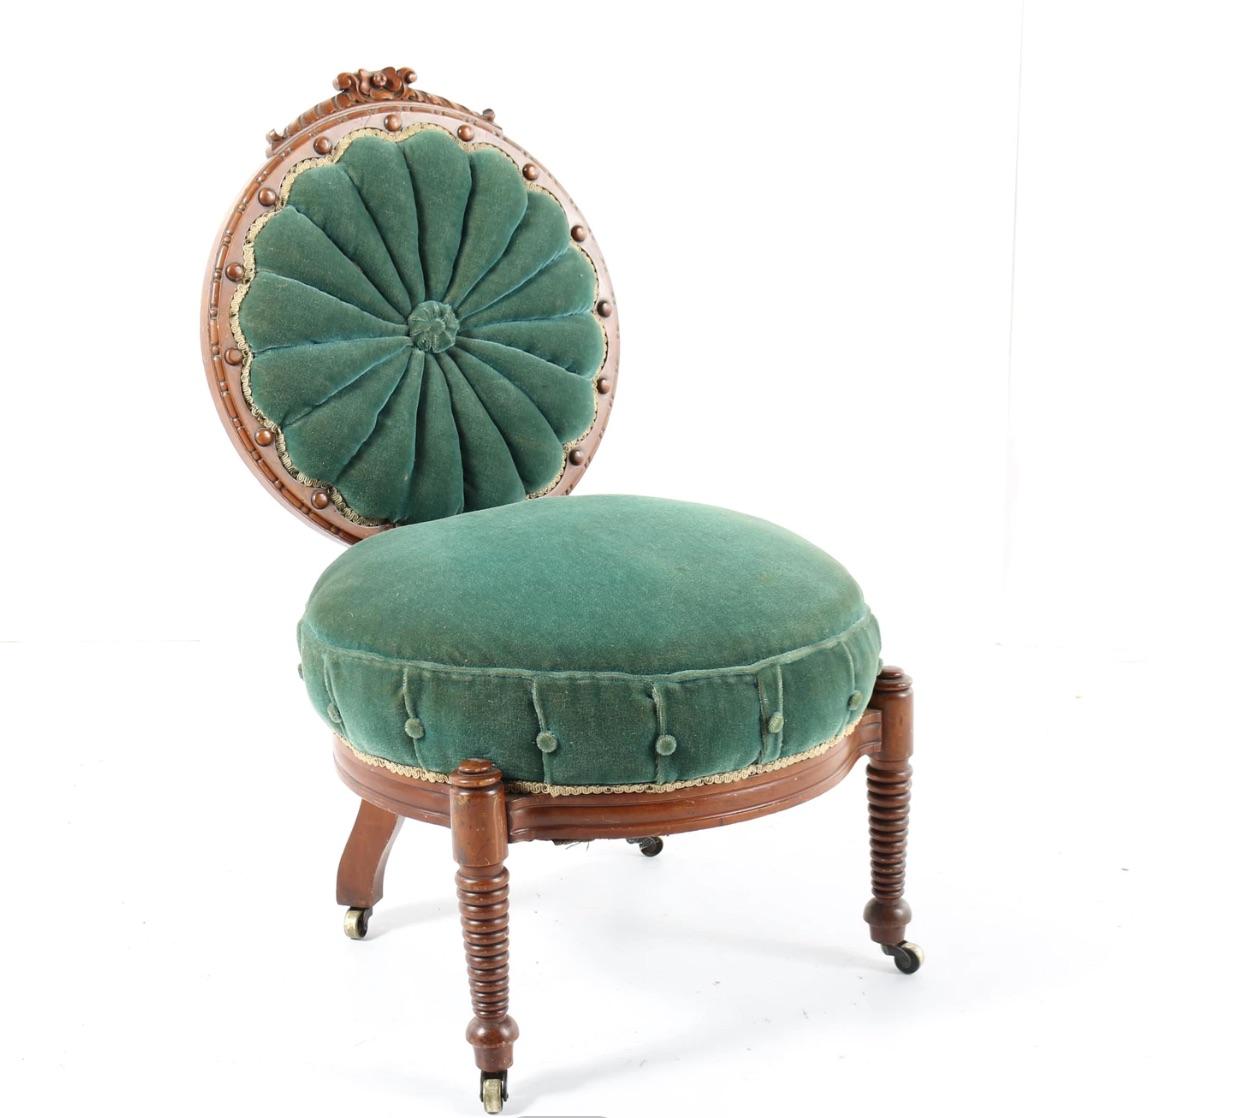 An incredibly Detailed Victorian, circa 1870-1890, light mahogany or cherrywood carved most charming green velvet chair with many old world refined details-
An antique Victorian luscious emerald green velvet upholstered accent chair. This chair